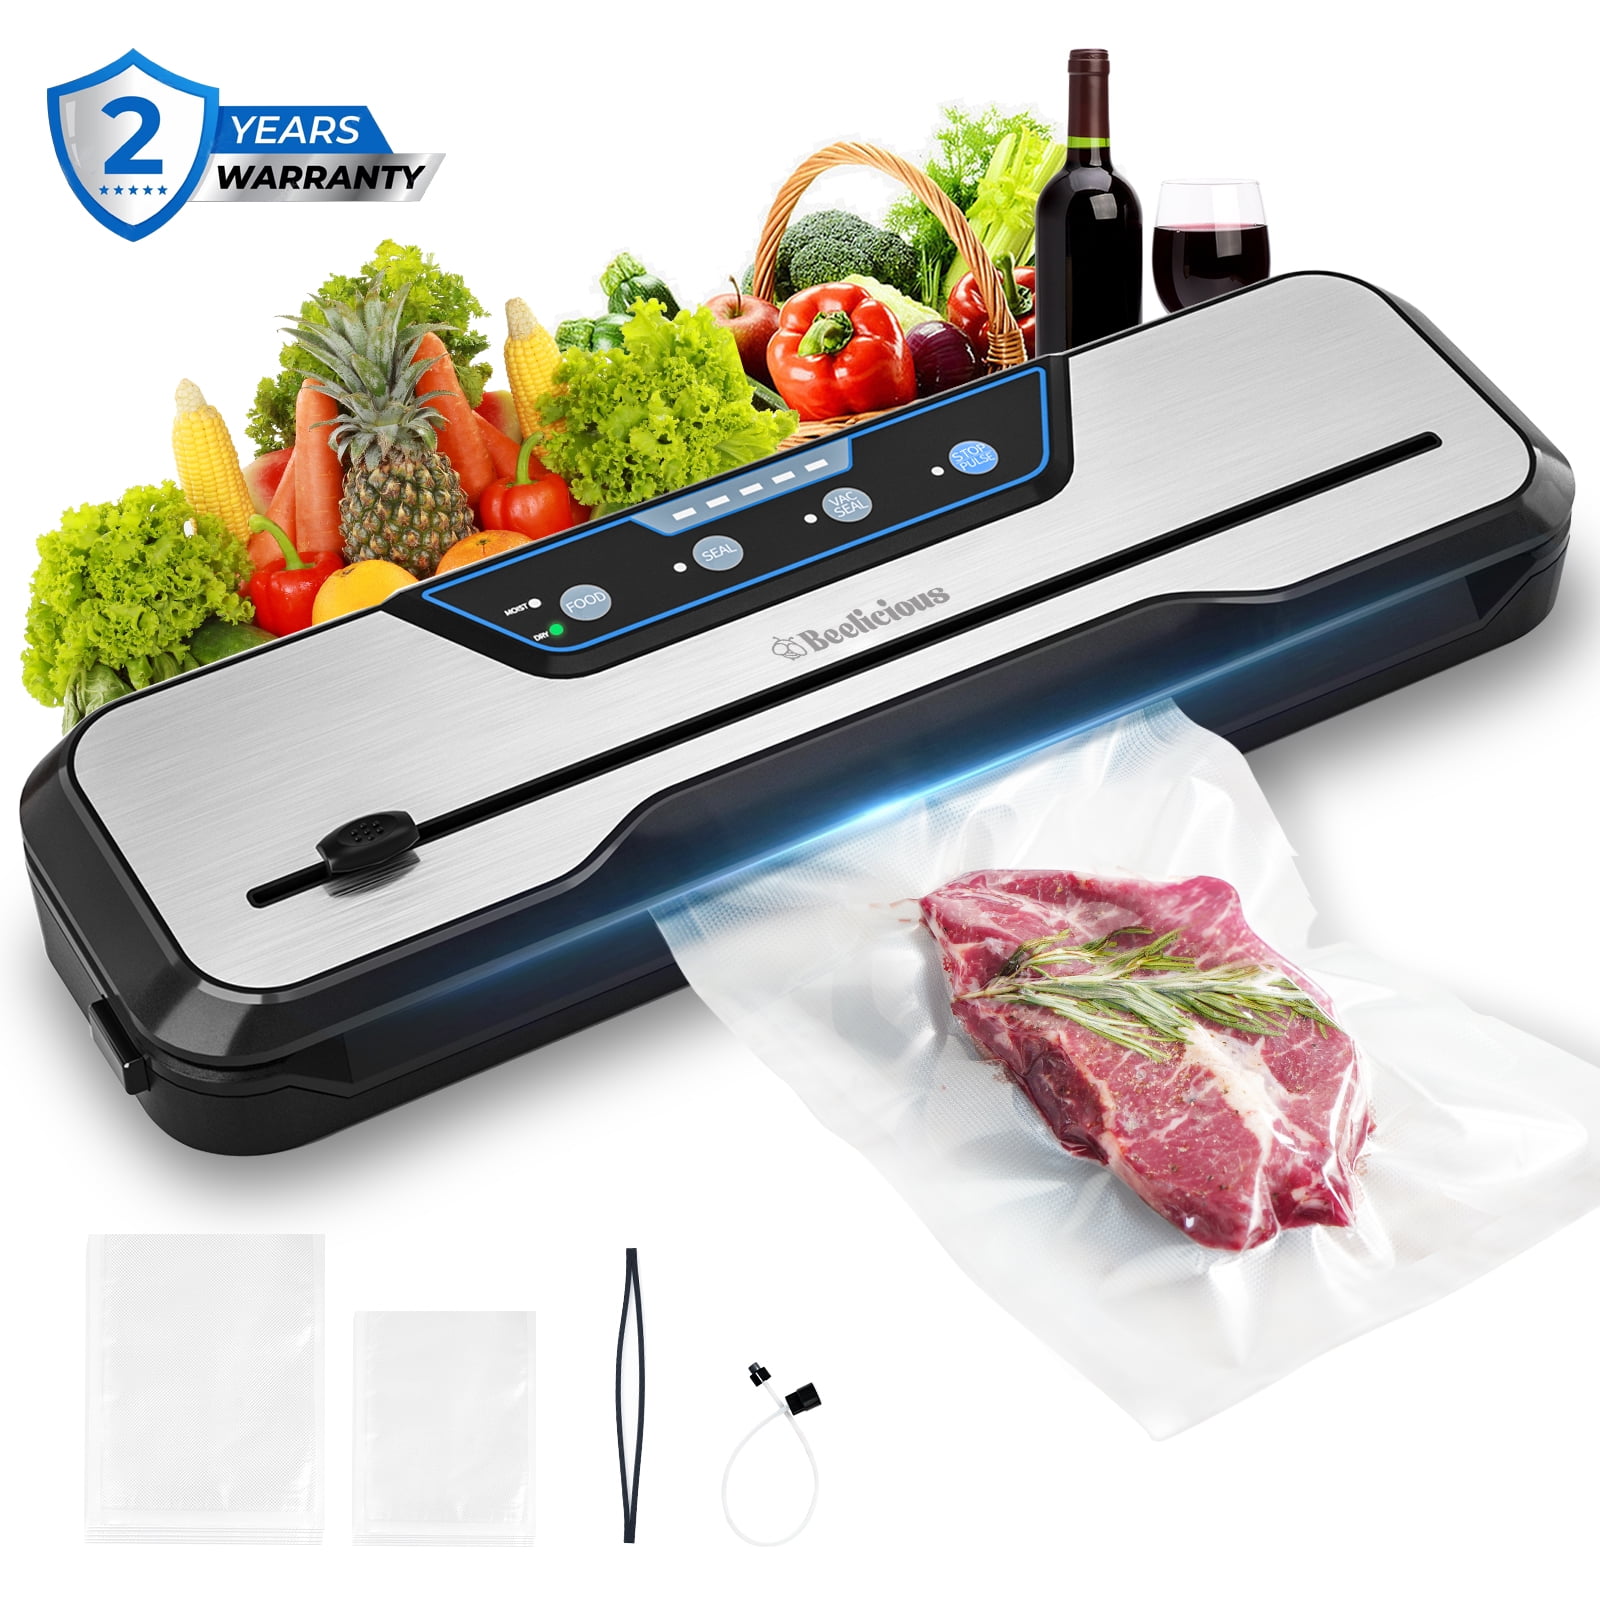 dubbellaag reguleren mist Beelicious® Vacuum Sealer Machine, with Starter Kit and 2-year Warranty,  Automatic Air Sealing Food Sealer for Food Storage, with Build-in  Cutter,Moist Mode,Air Suction Hose| LED Indicator | Sous Vide - Walmart.com